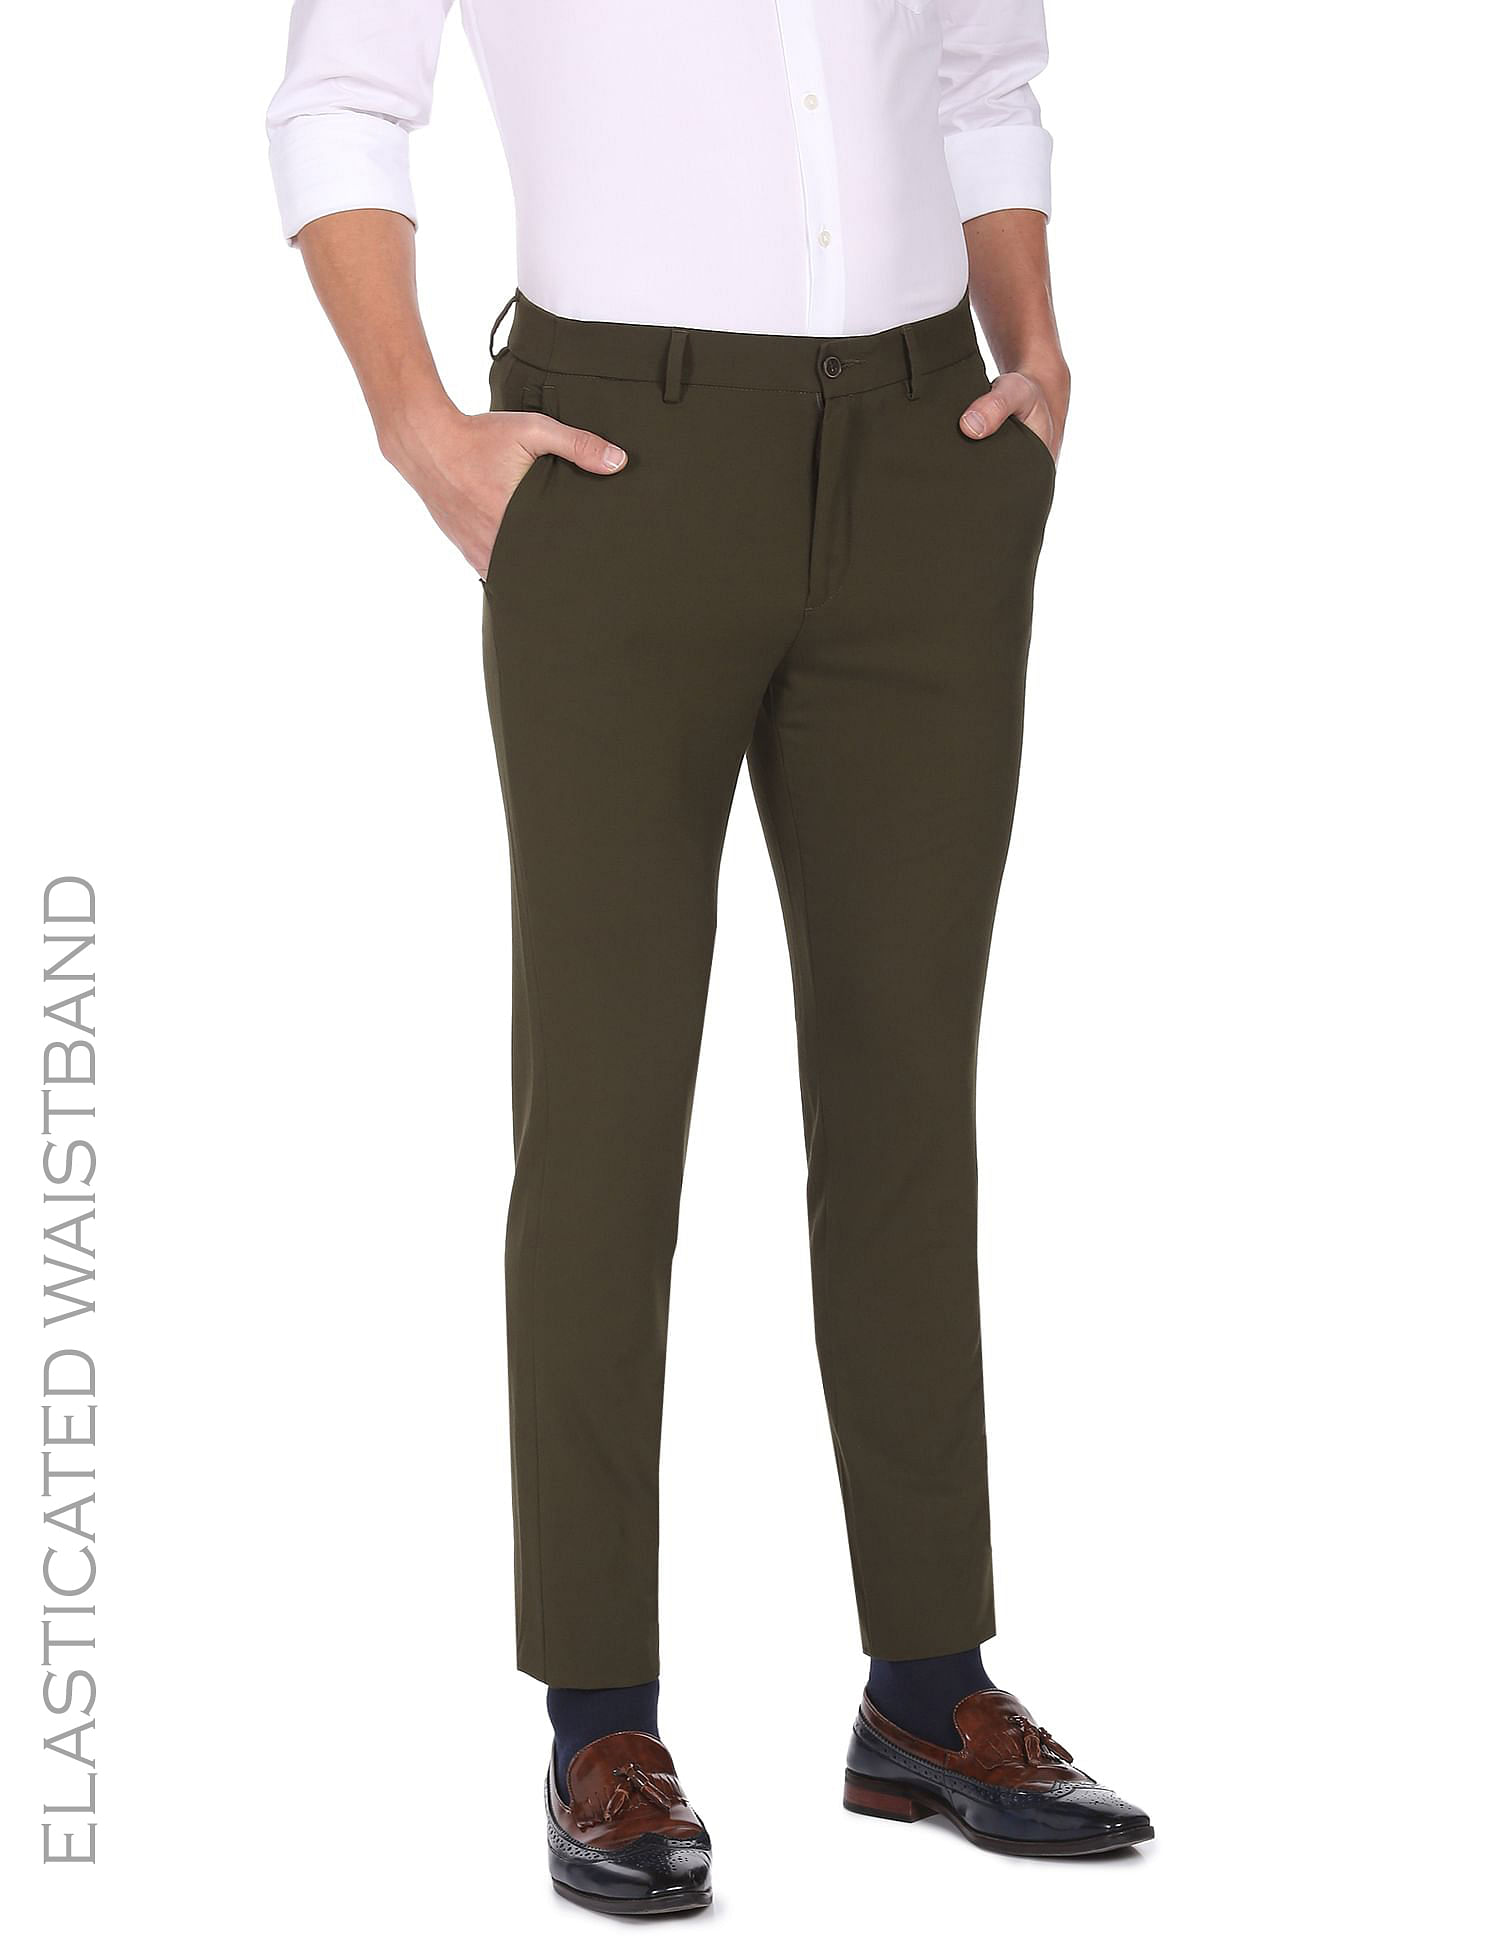 Mens Elasticated Waist Rugby Trouser